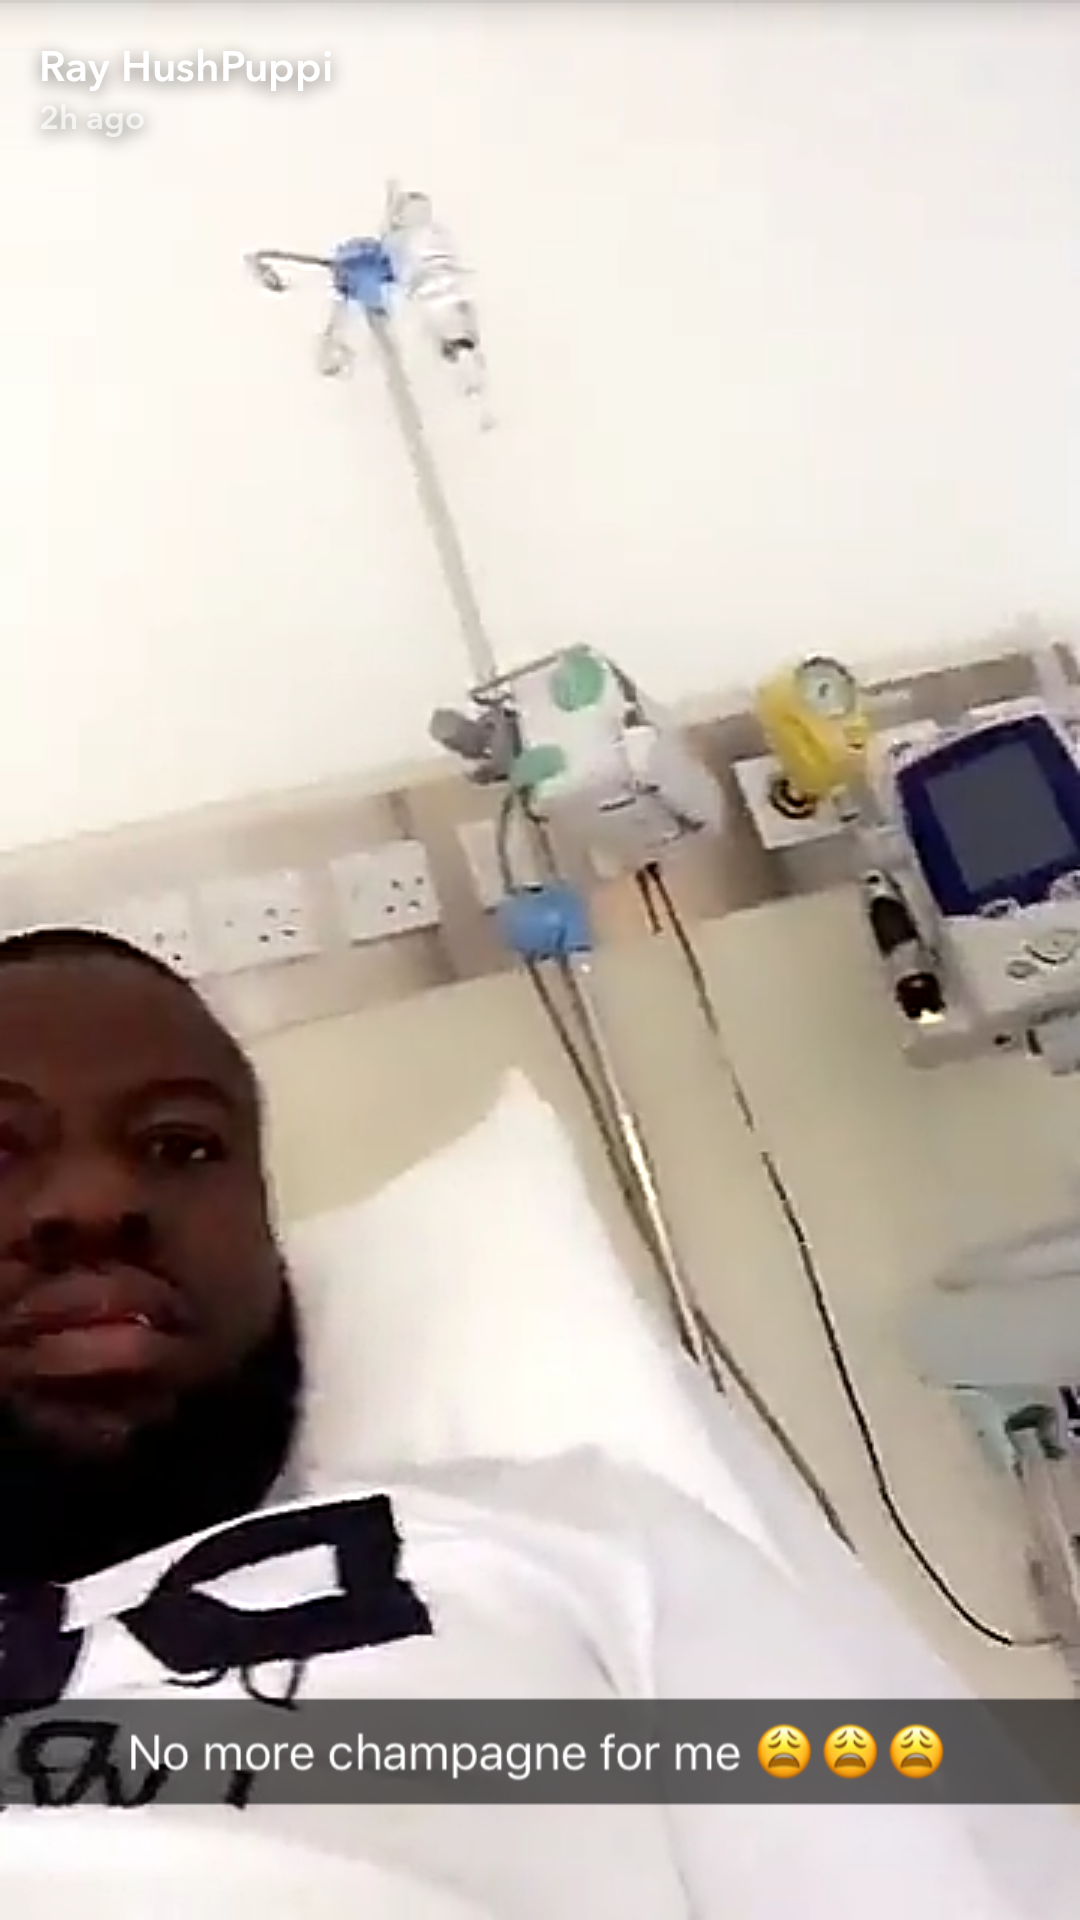 Hushpuppi Has Been Hospitalized After Too Much Champagne (2)